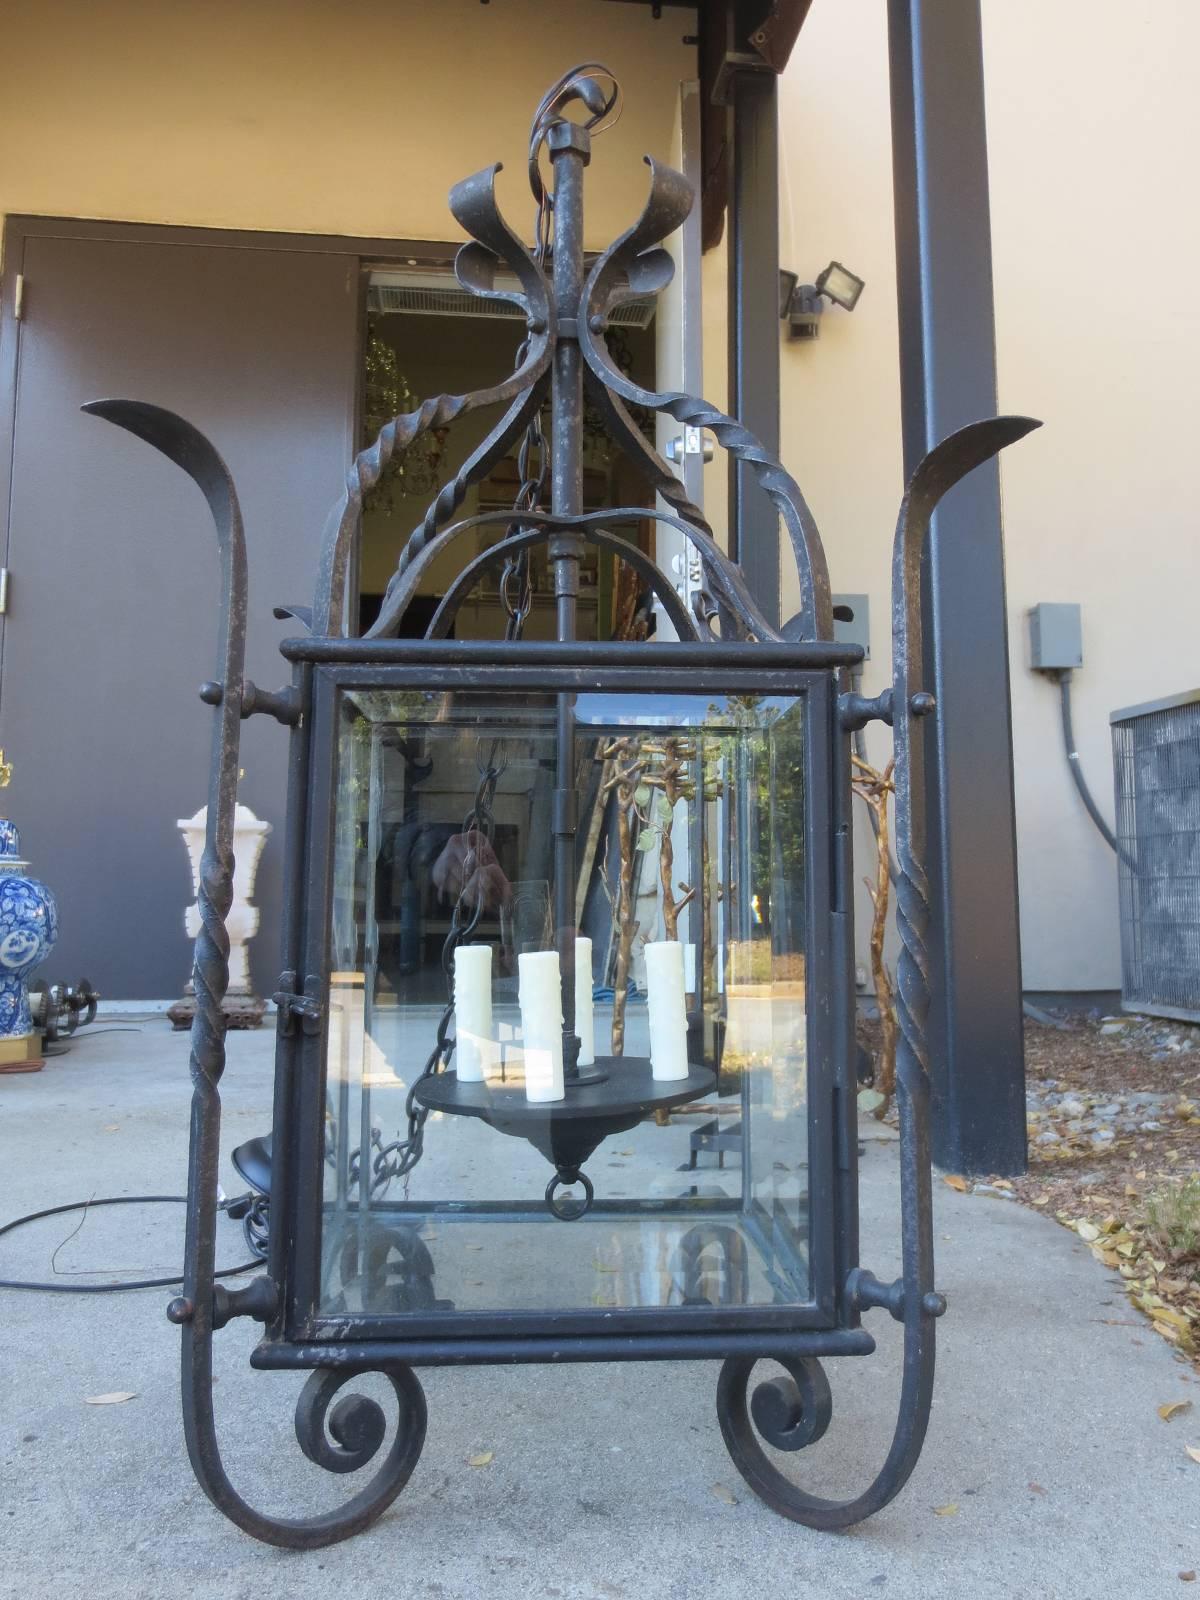 Late 19th-early 20th century French hand-forged lantern.